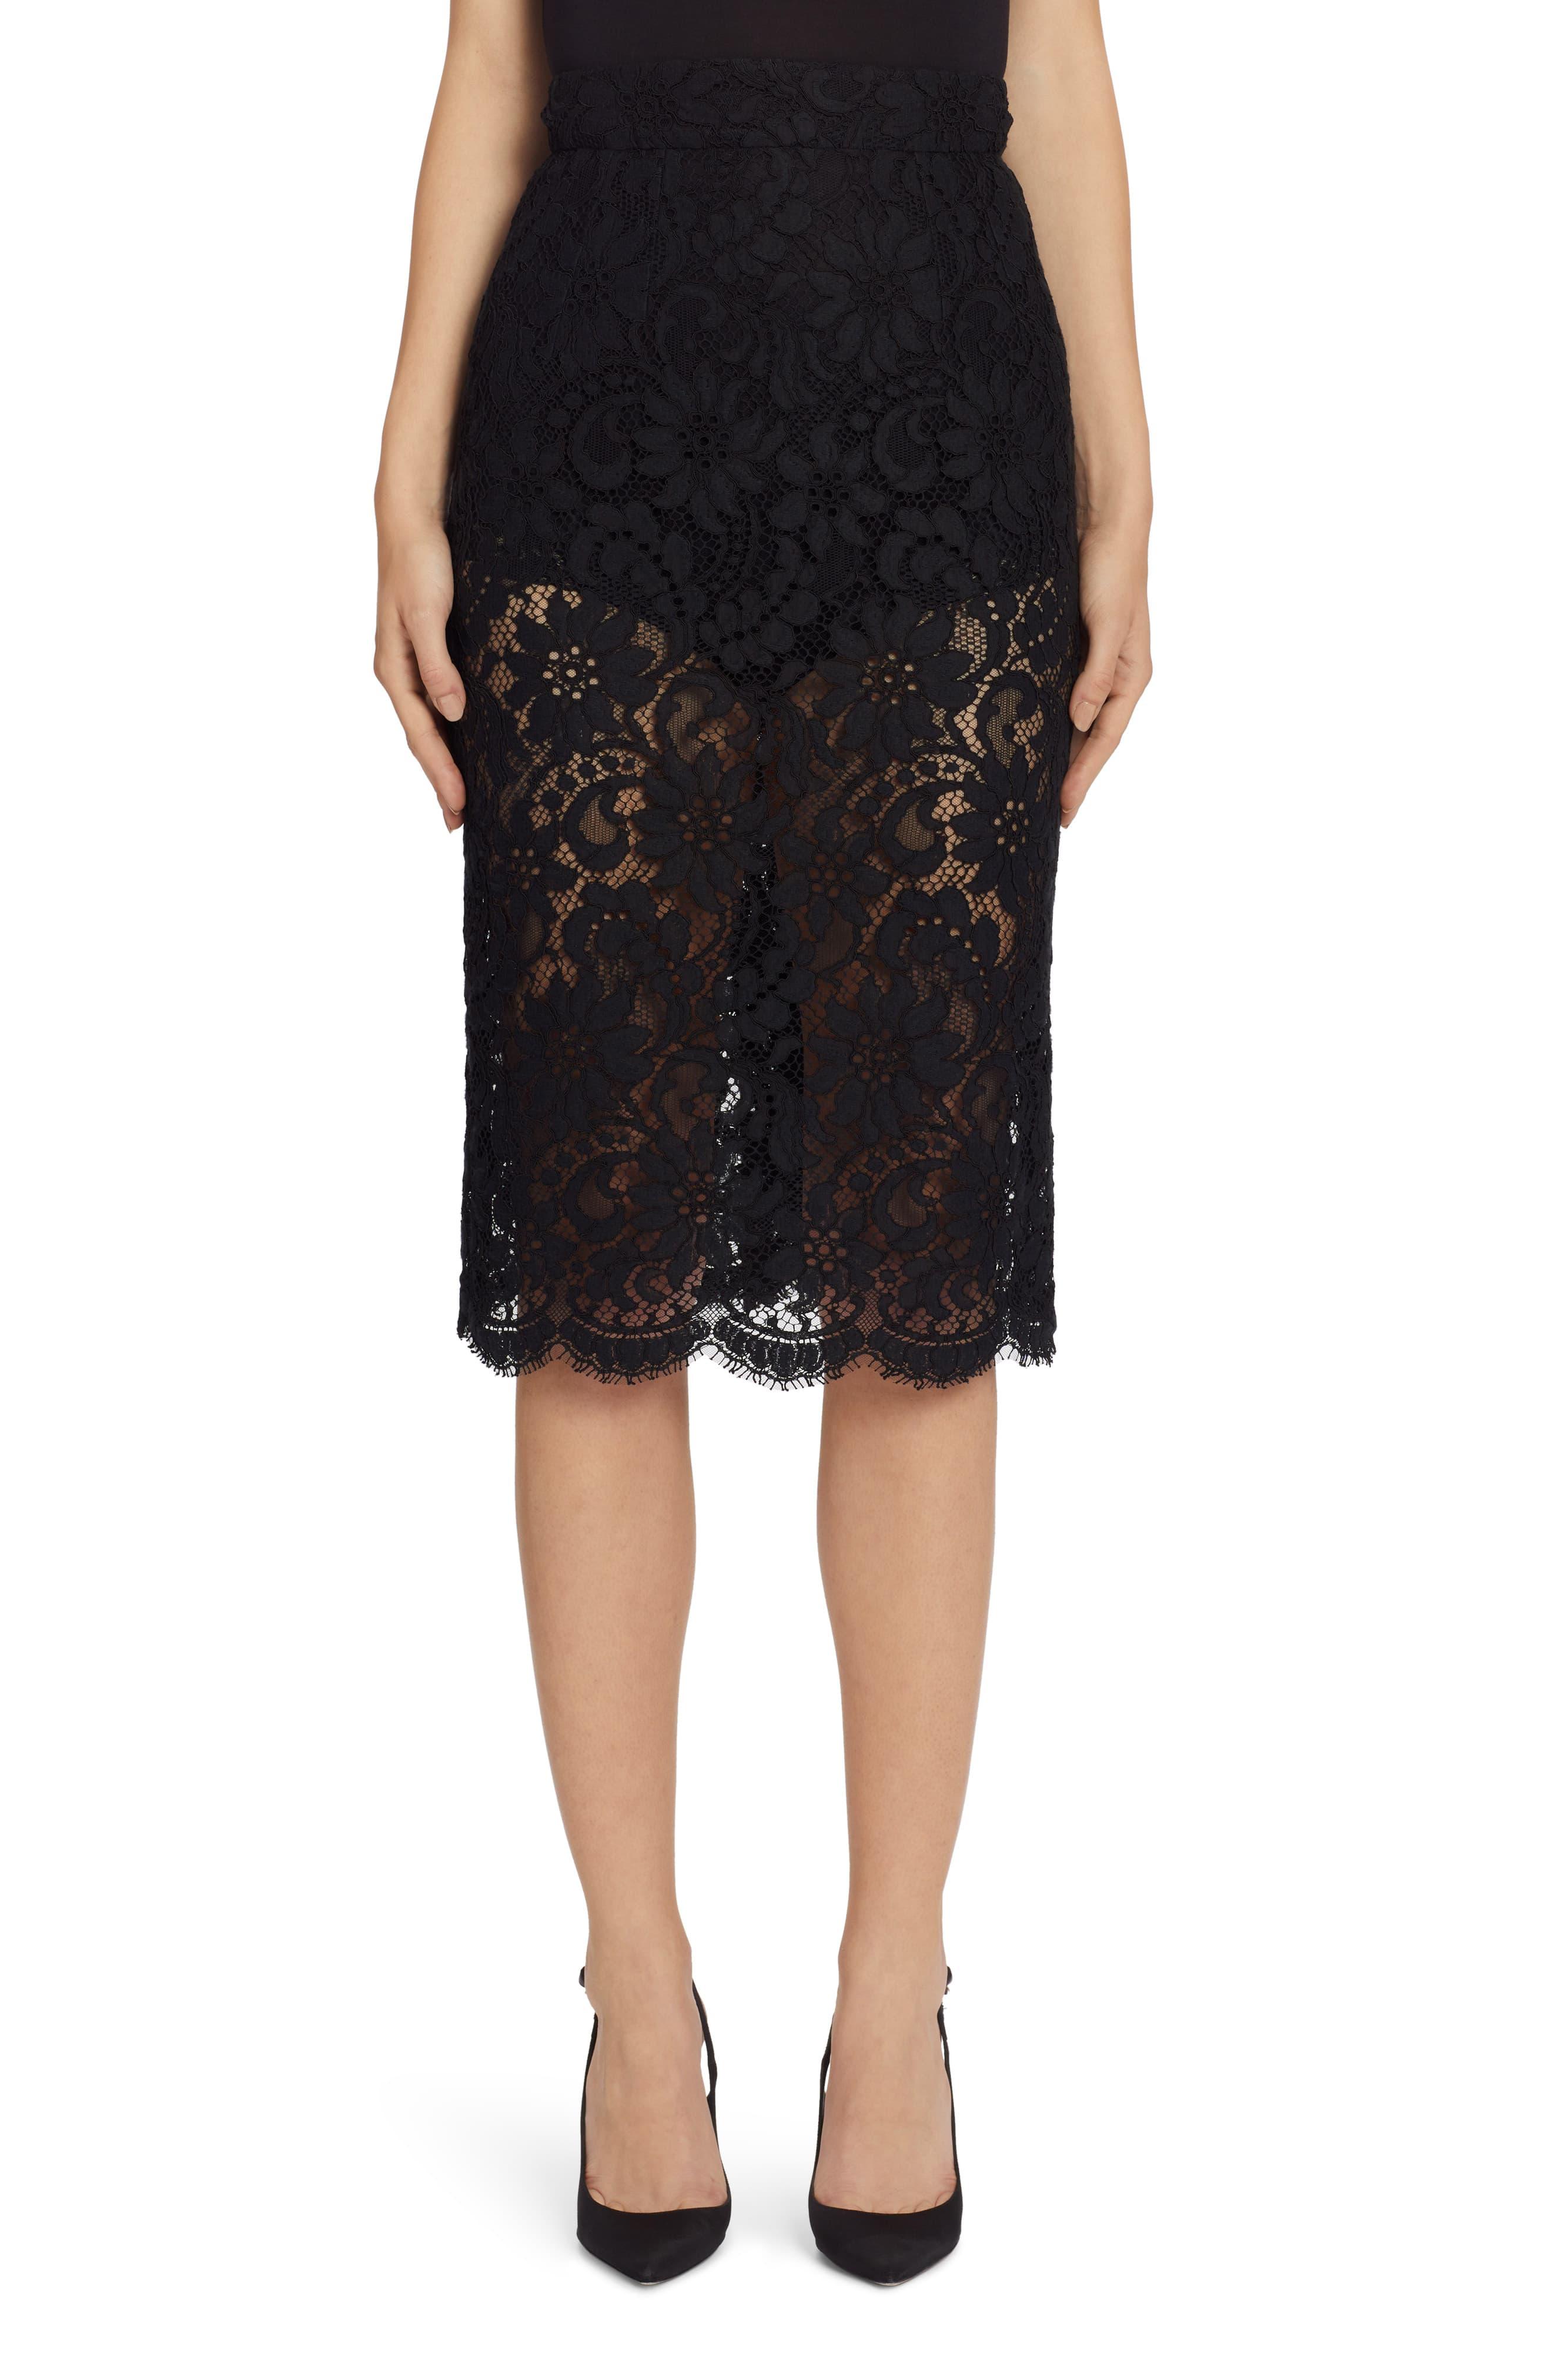 Dolce & Gabbana Lace Pencil Skirt in Black - Lyst